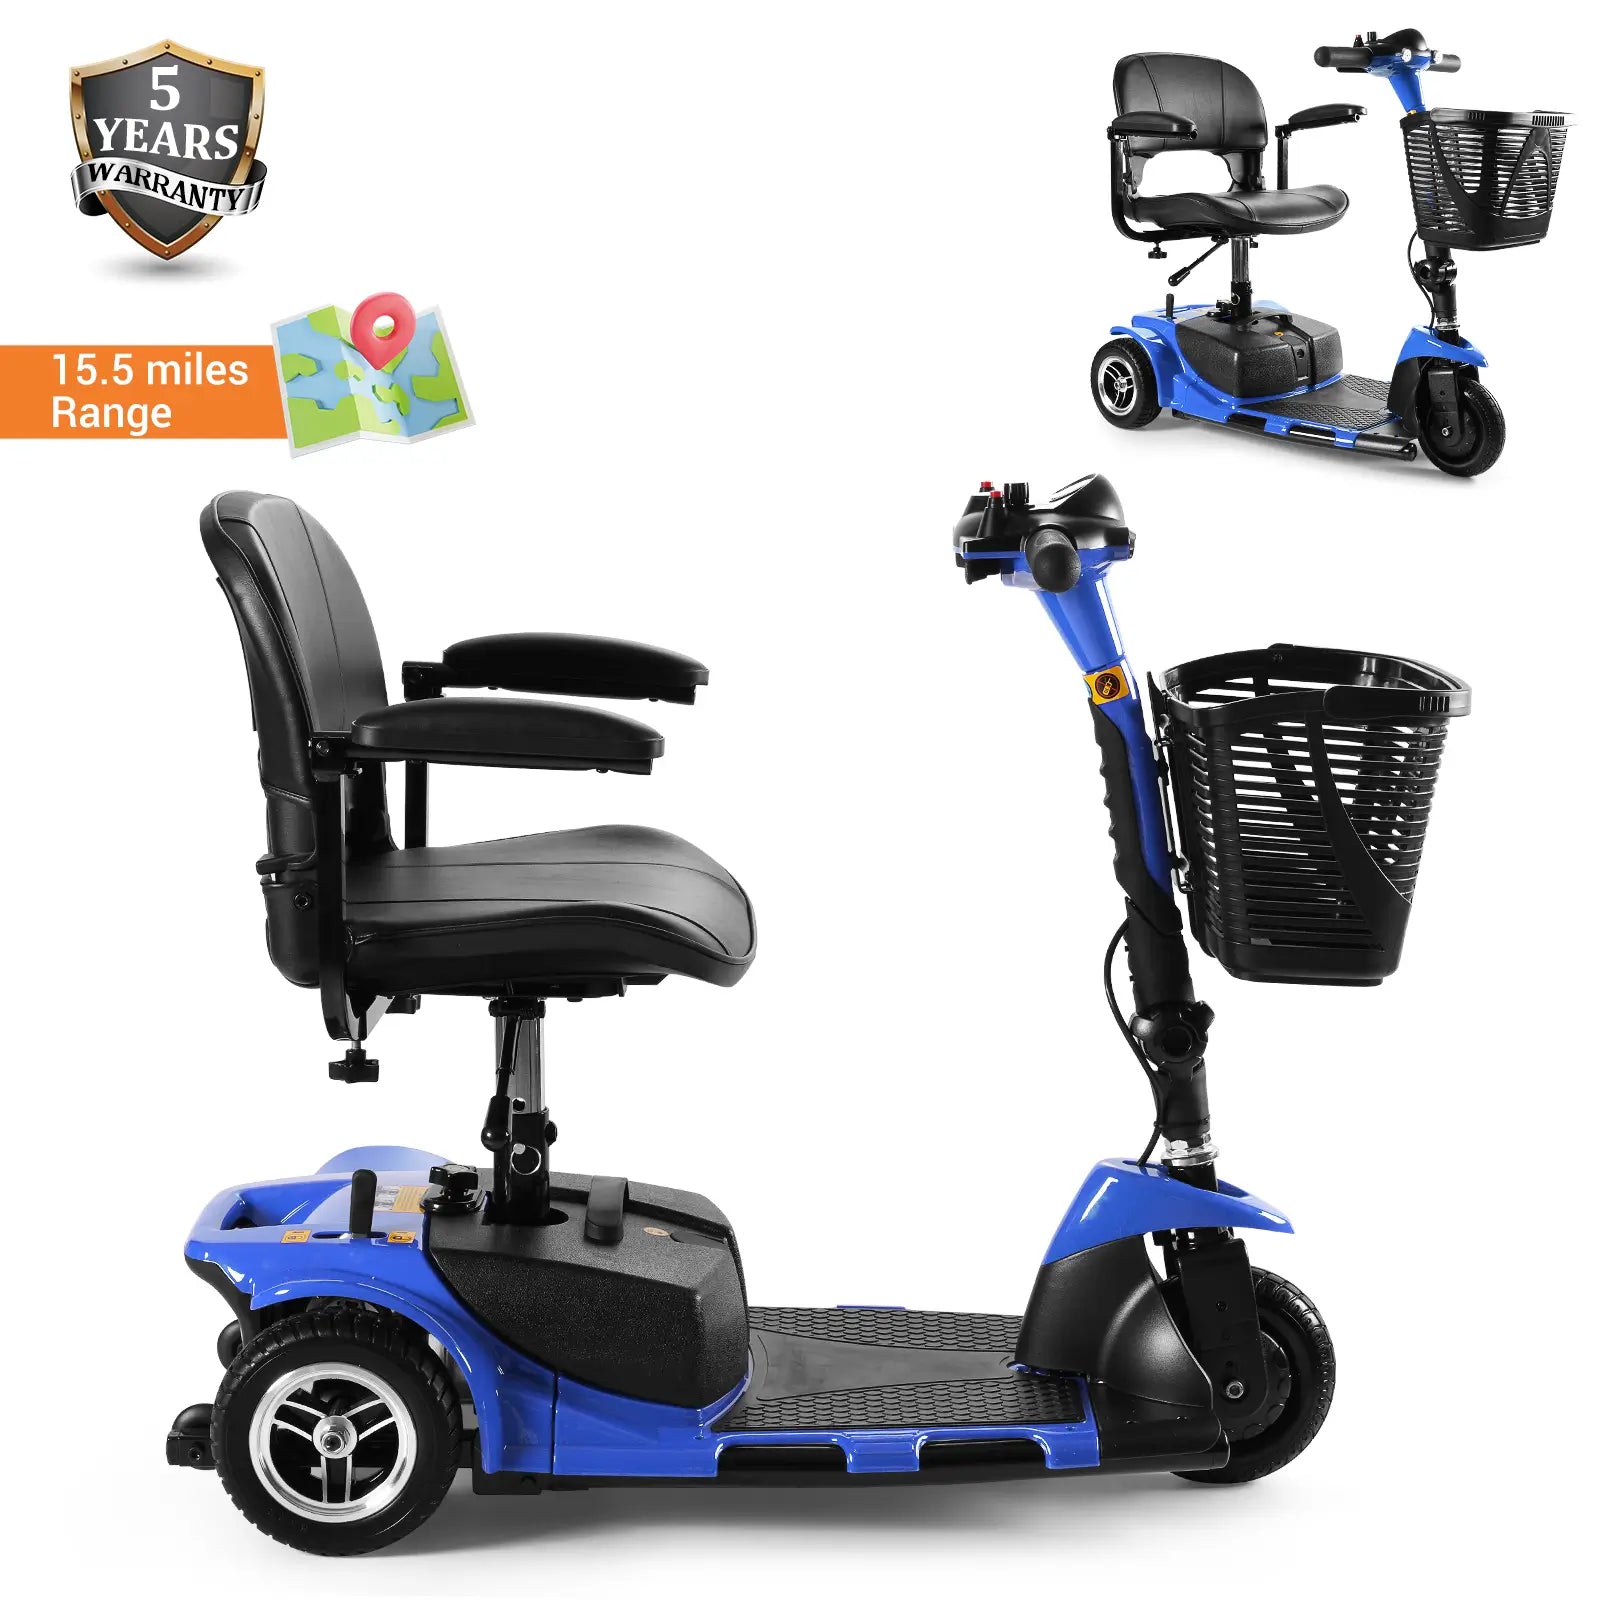 Soulout 3 Wheel Electric Mobility Scooter-Blue-15.5miles range